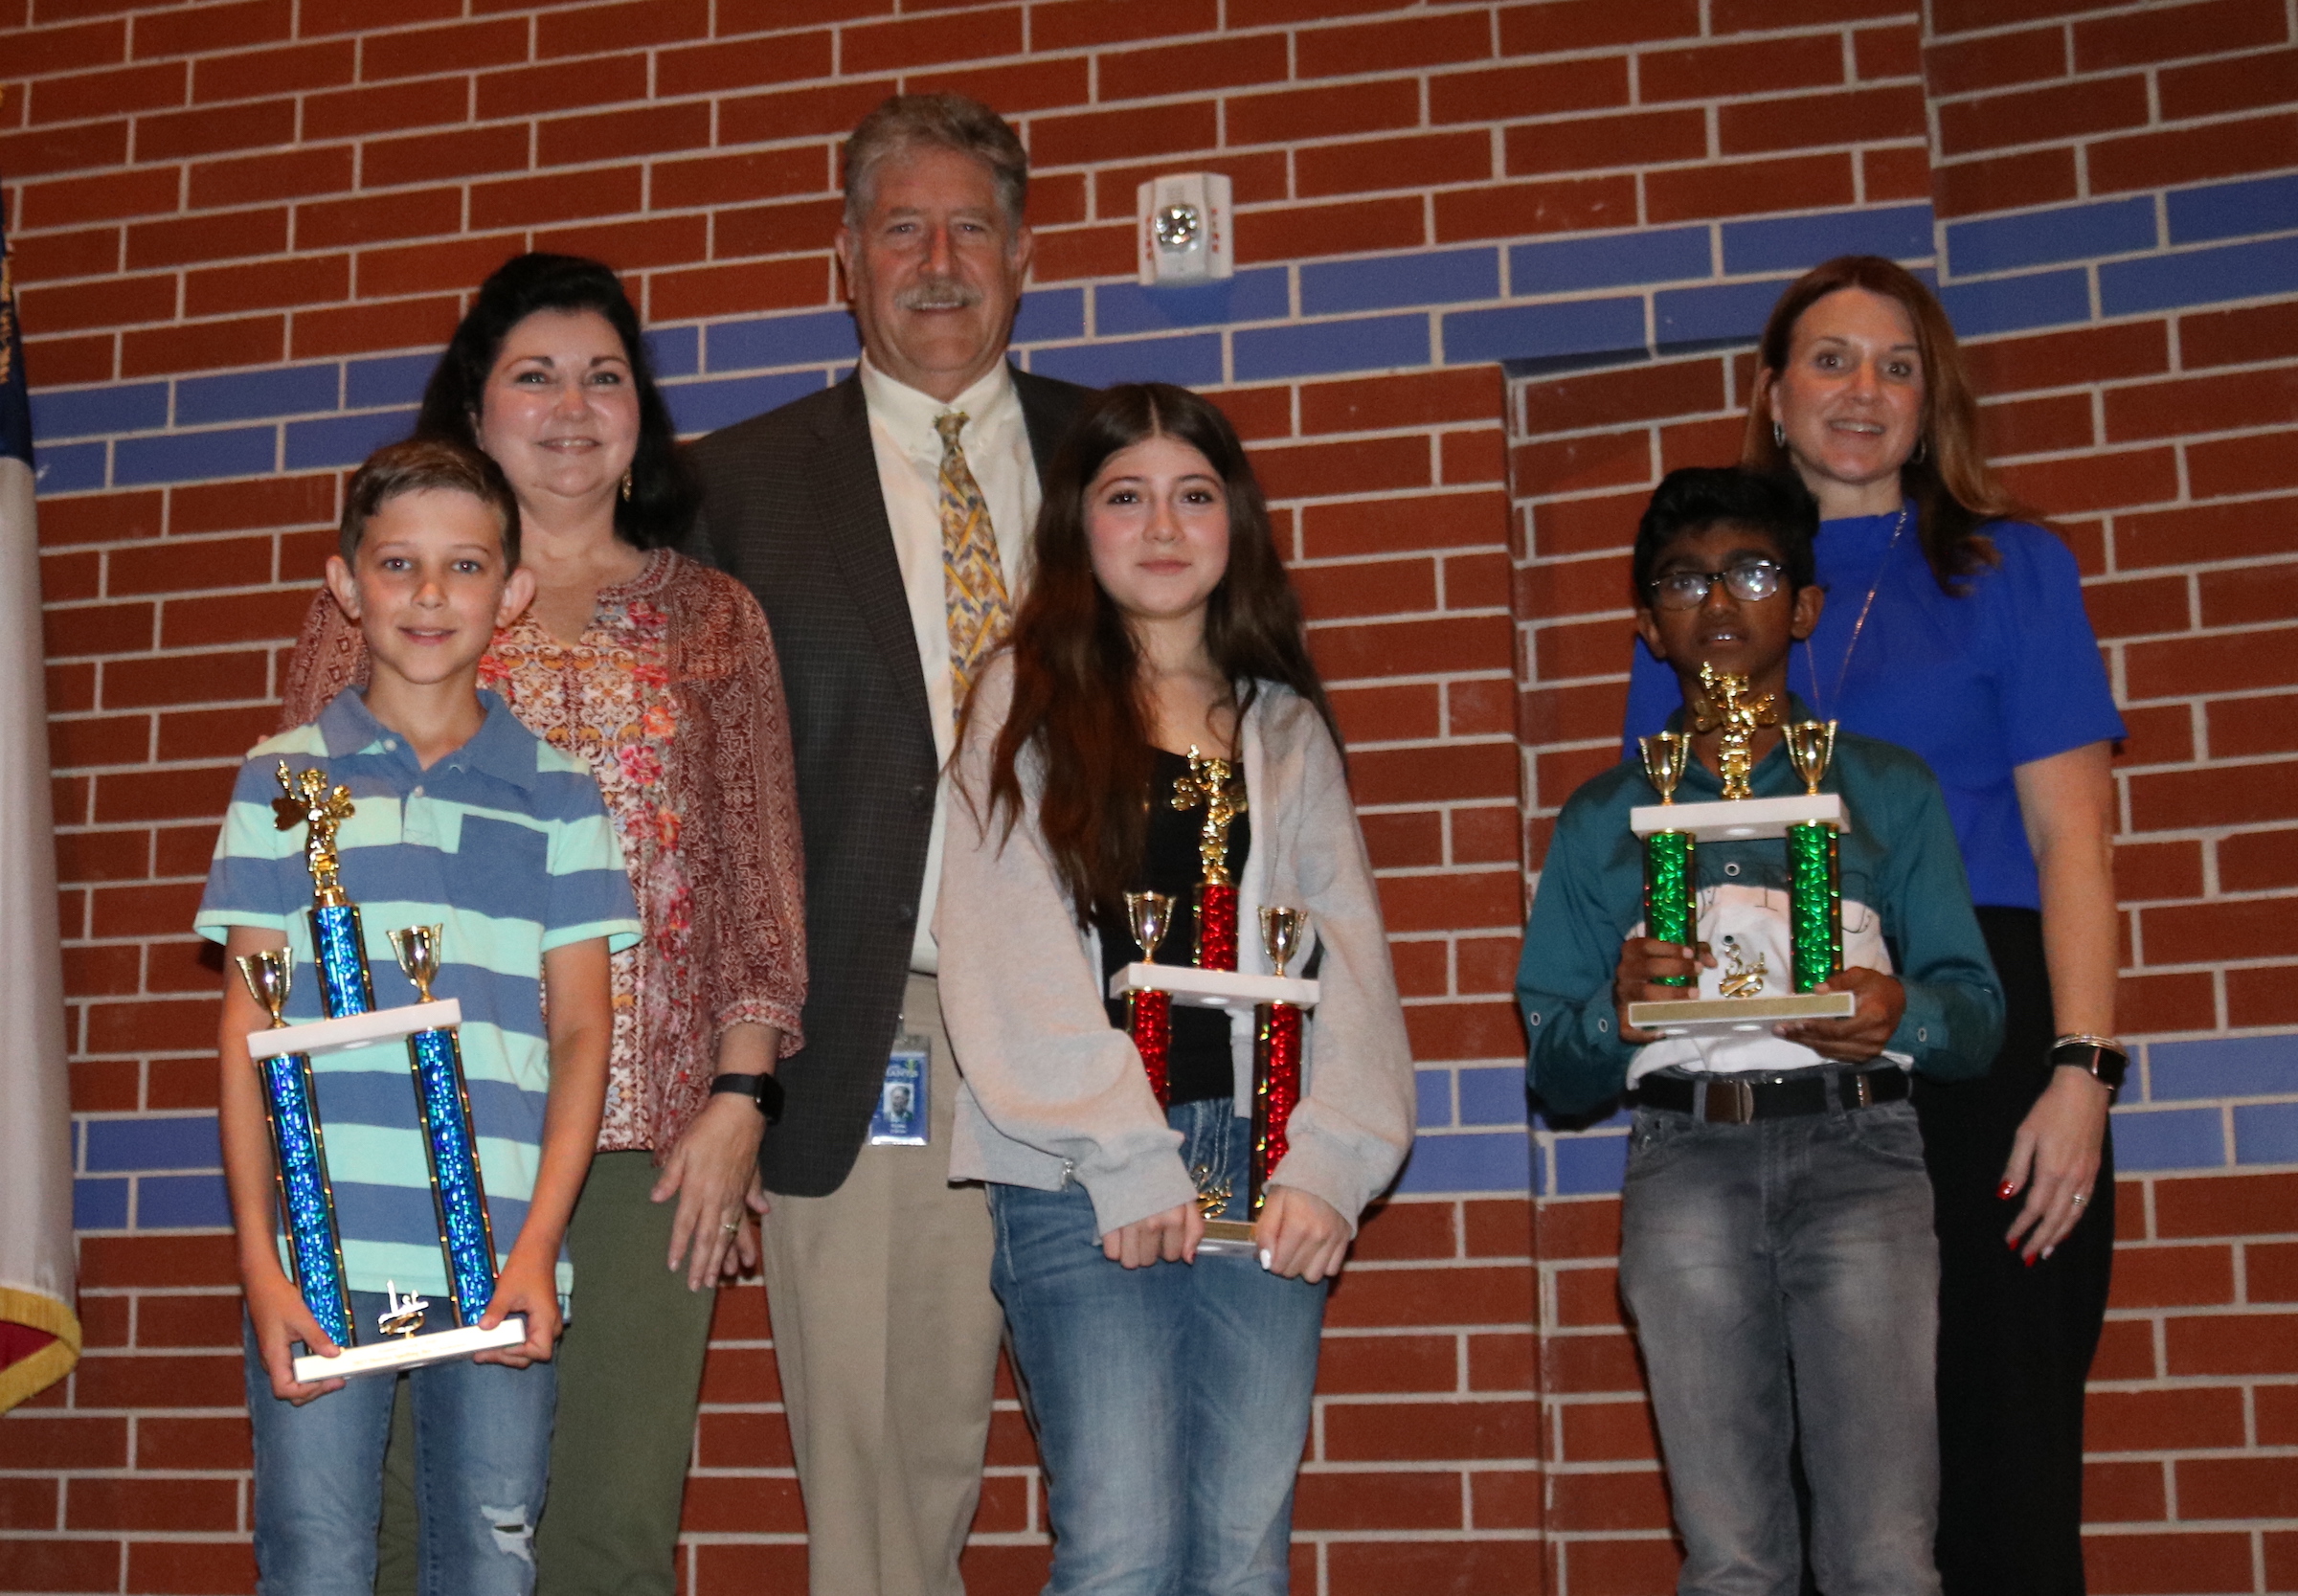 GCCISD Spelling Bee qualifiers pose with trophies, superintendent, and school principals